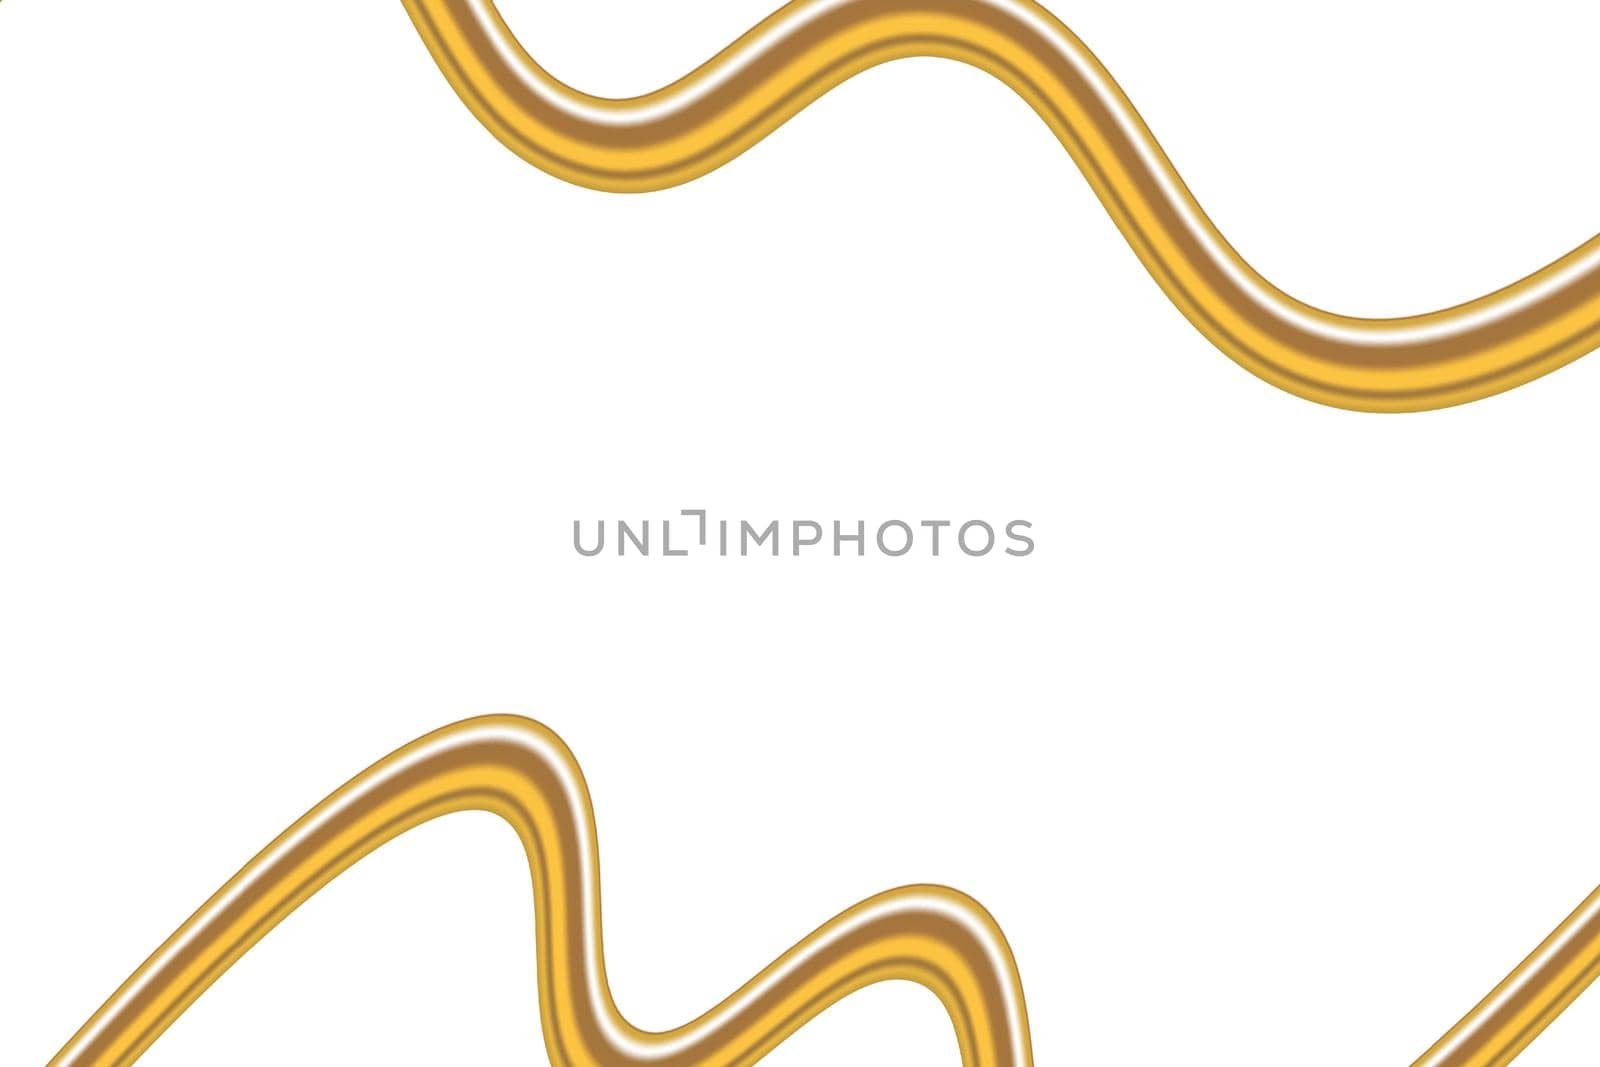 Abstract background with colorful paper cut shapes. Design for poster, banner, card. White and yellow abstract wave illustration. 3D paper images with a subtle blend of bright colors. Copy space.